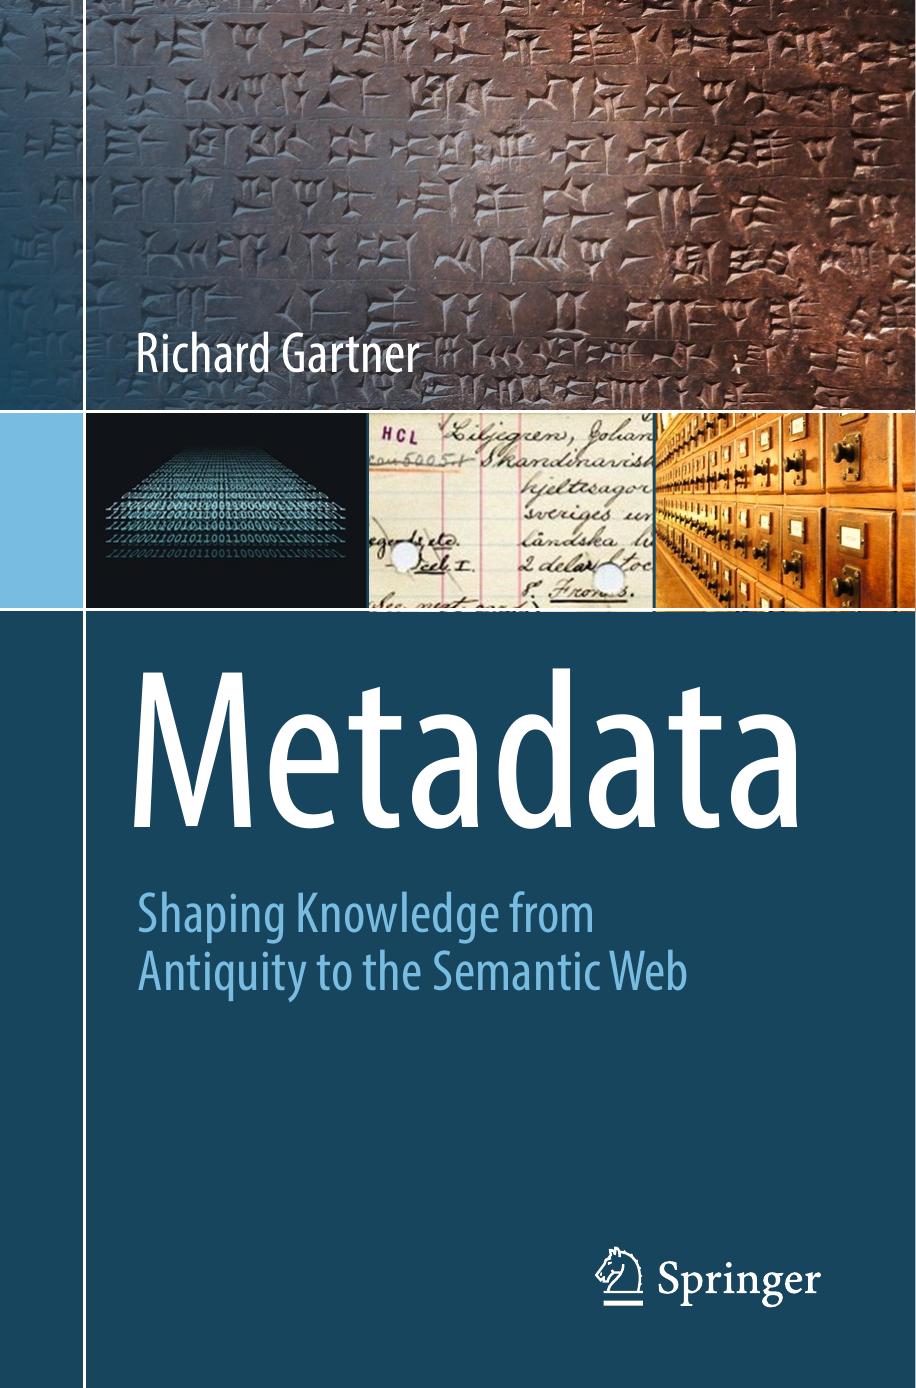 Metadata: Shaping Knowledge From Antiquity to the Semantic Web